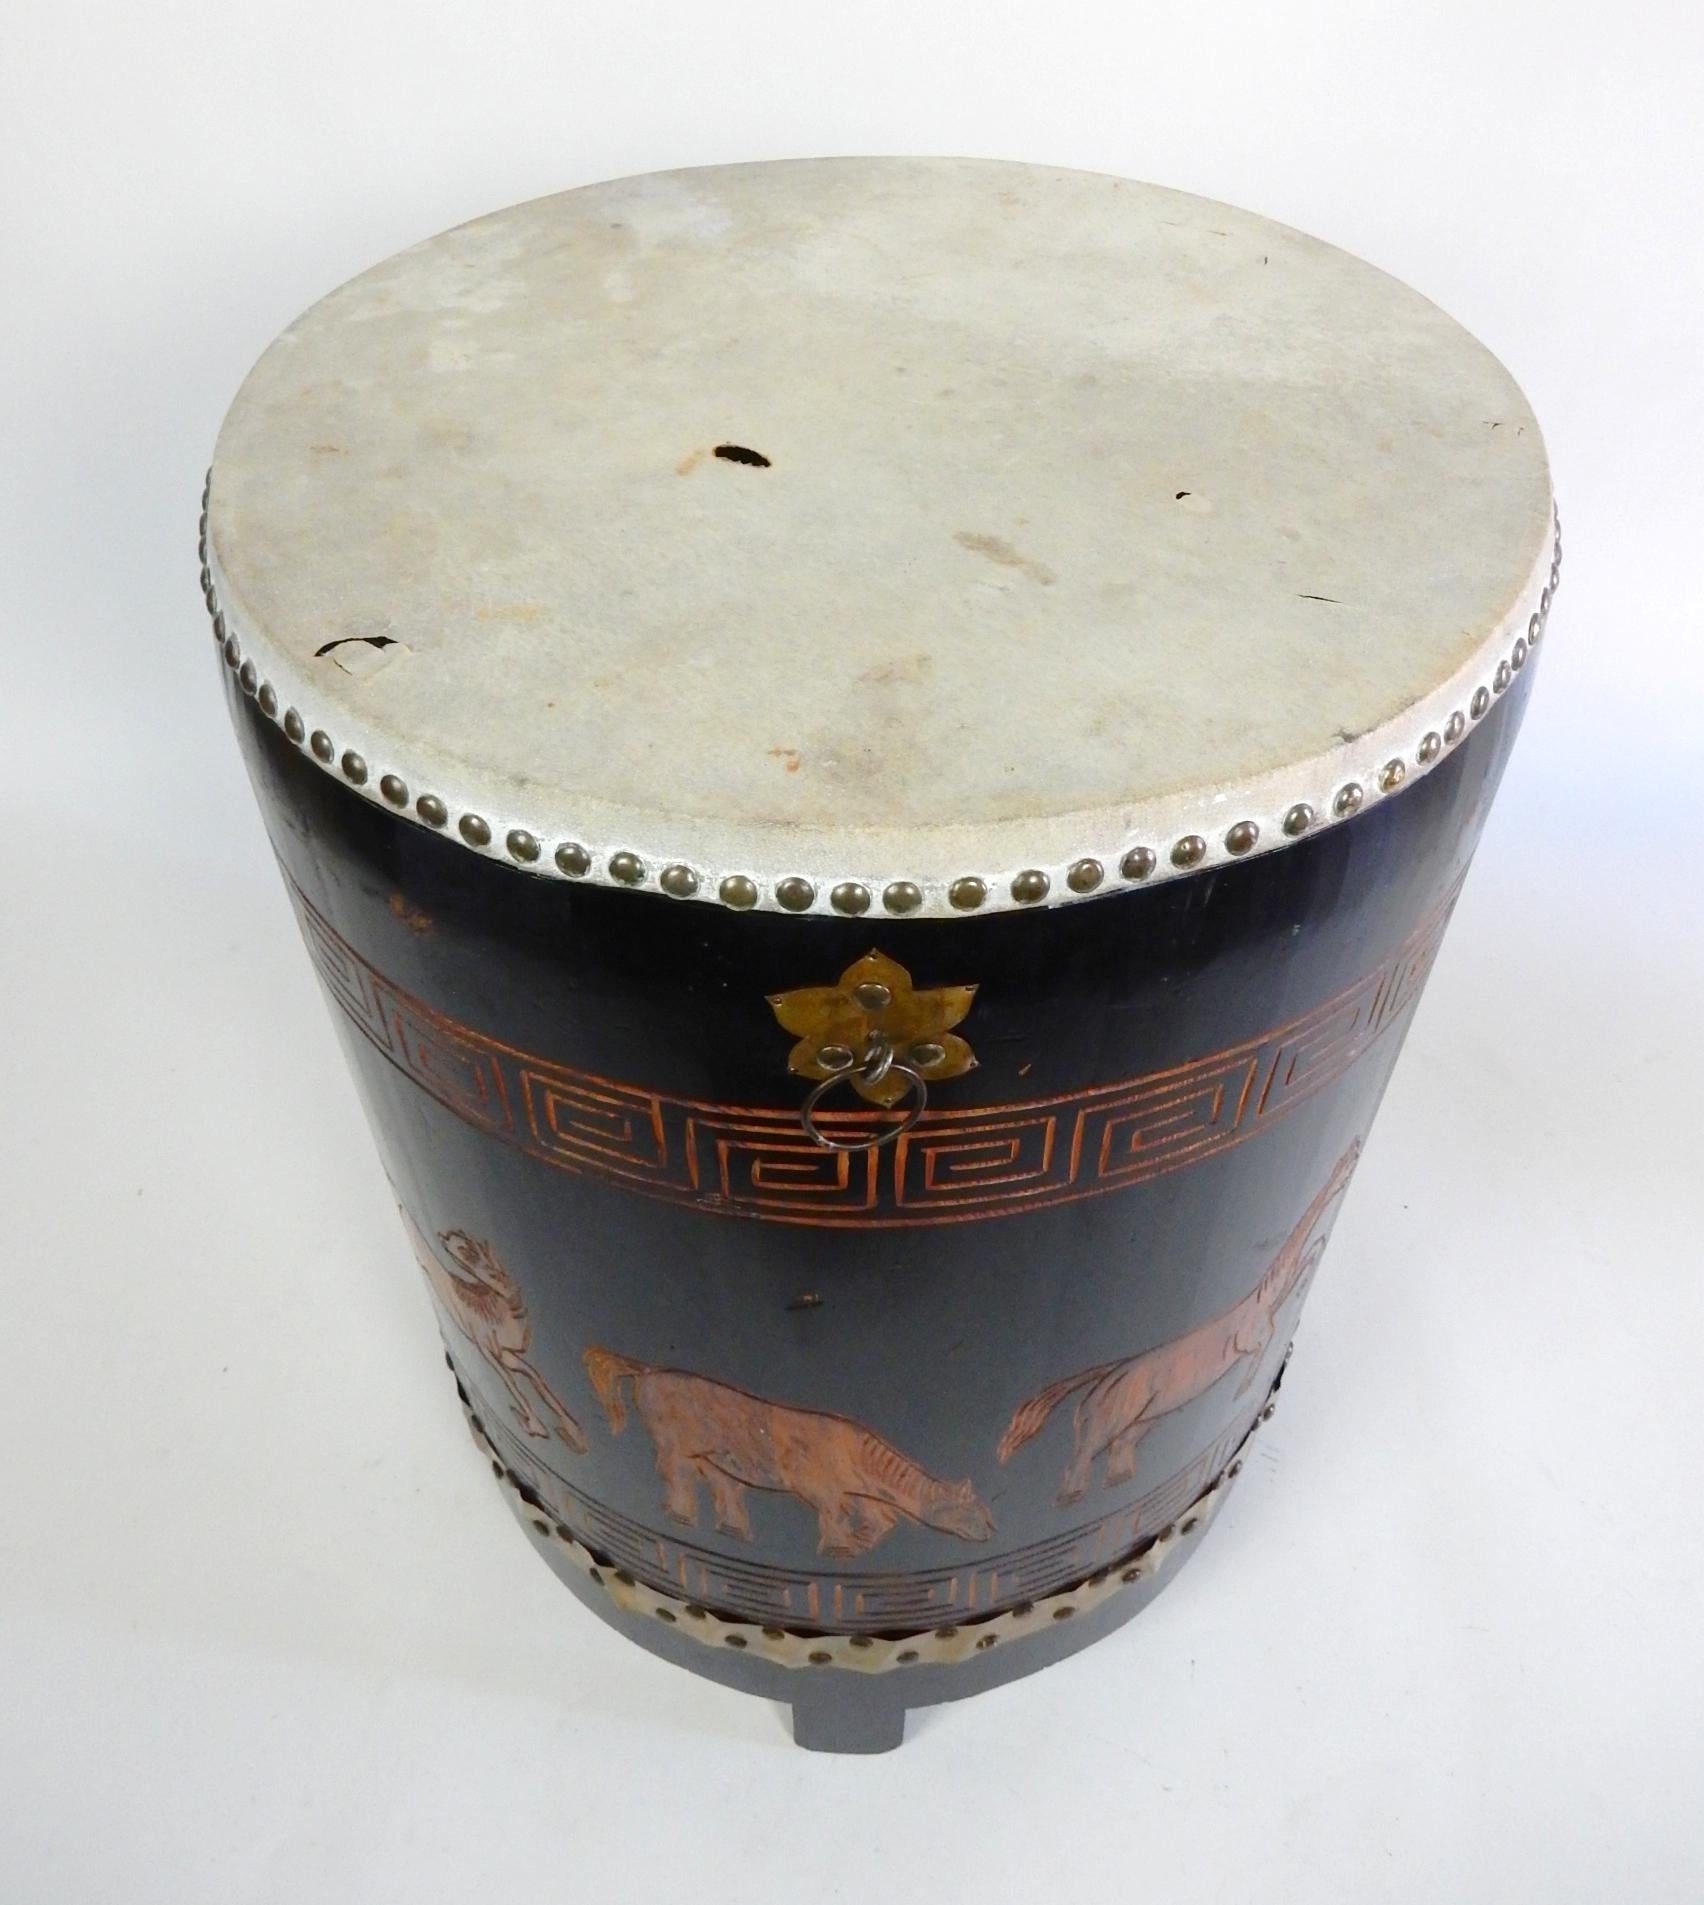 This would make a unique side table or stand.
1950s Asian Tang horse drum with a skin top.
Hand caved & painted details all the way around with 
3 brass ring handles as well as nailhead banded strap. 
Stands 24in tall x 18in across.
Shipped via